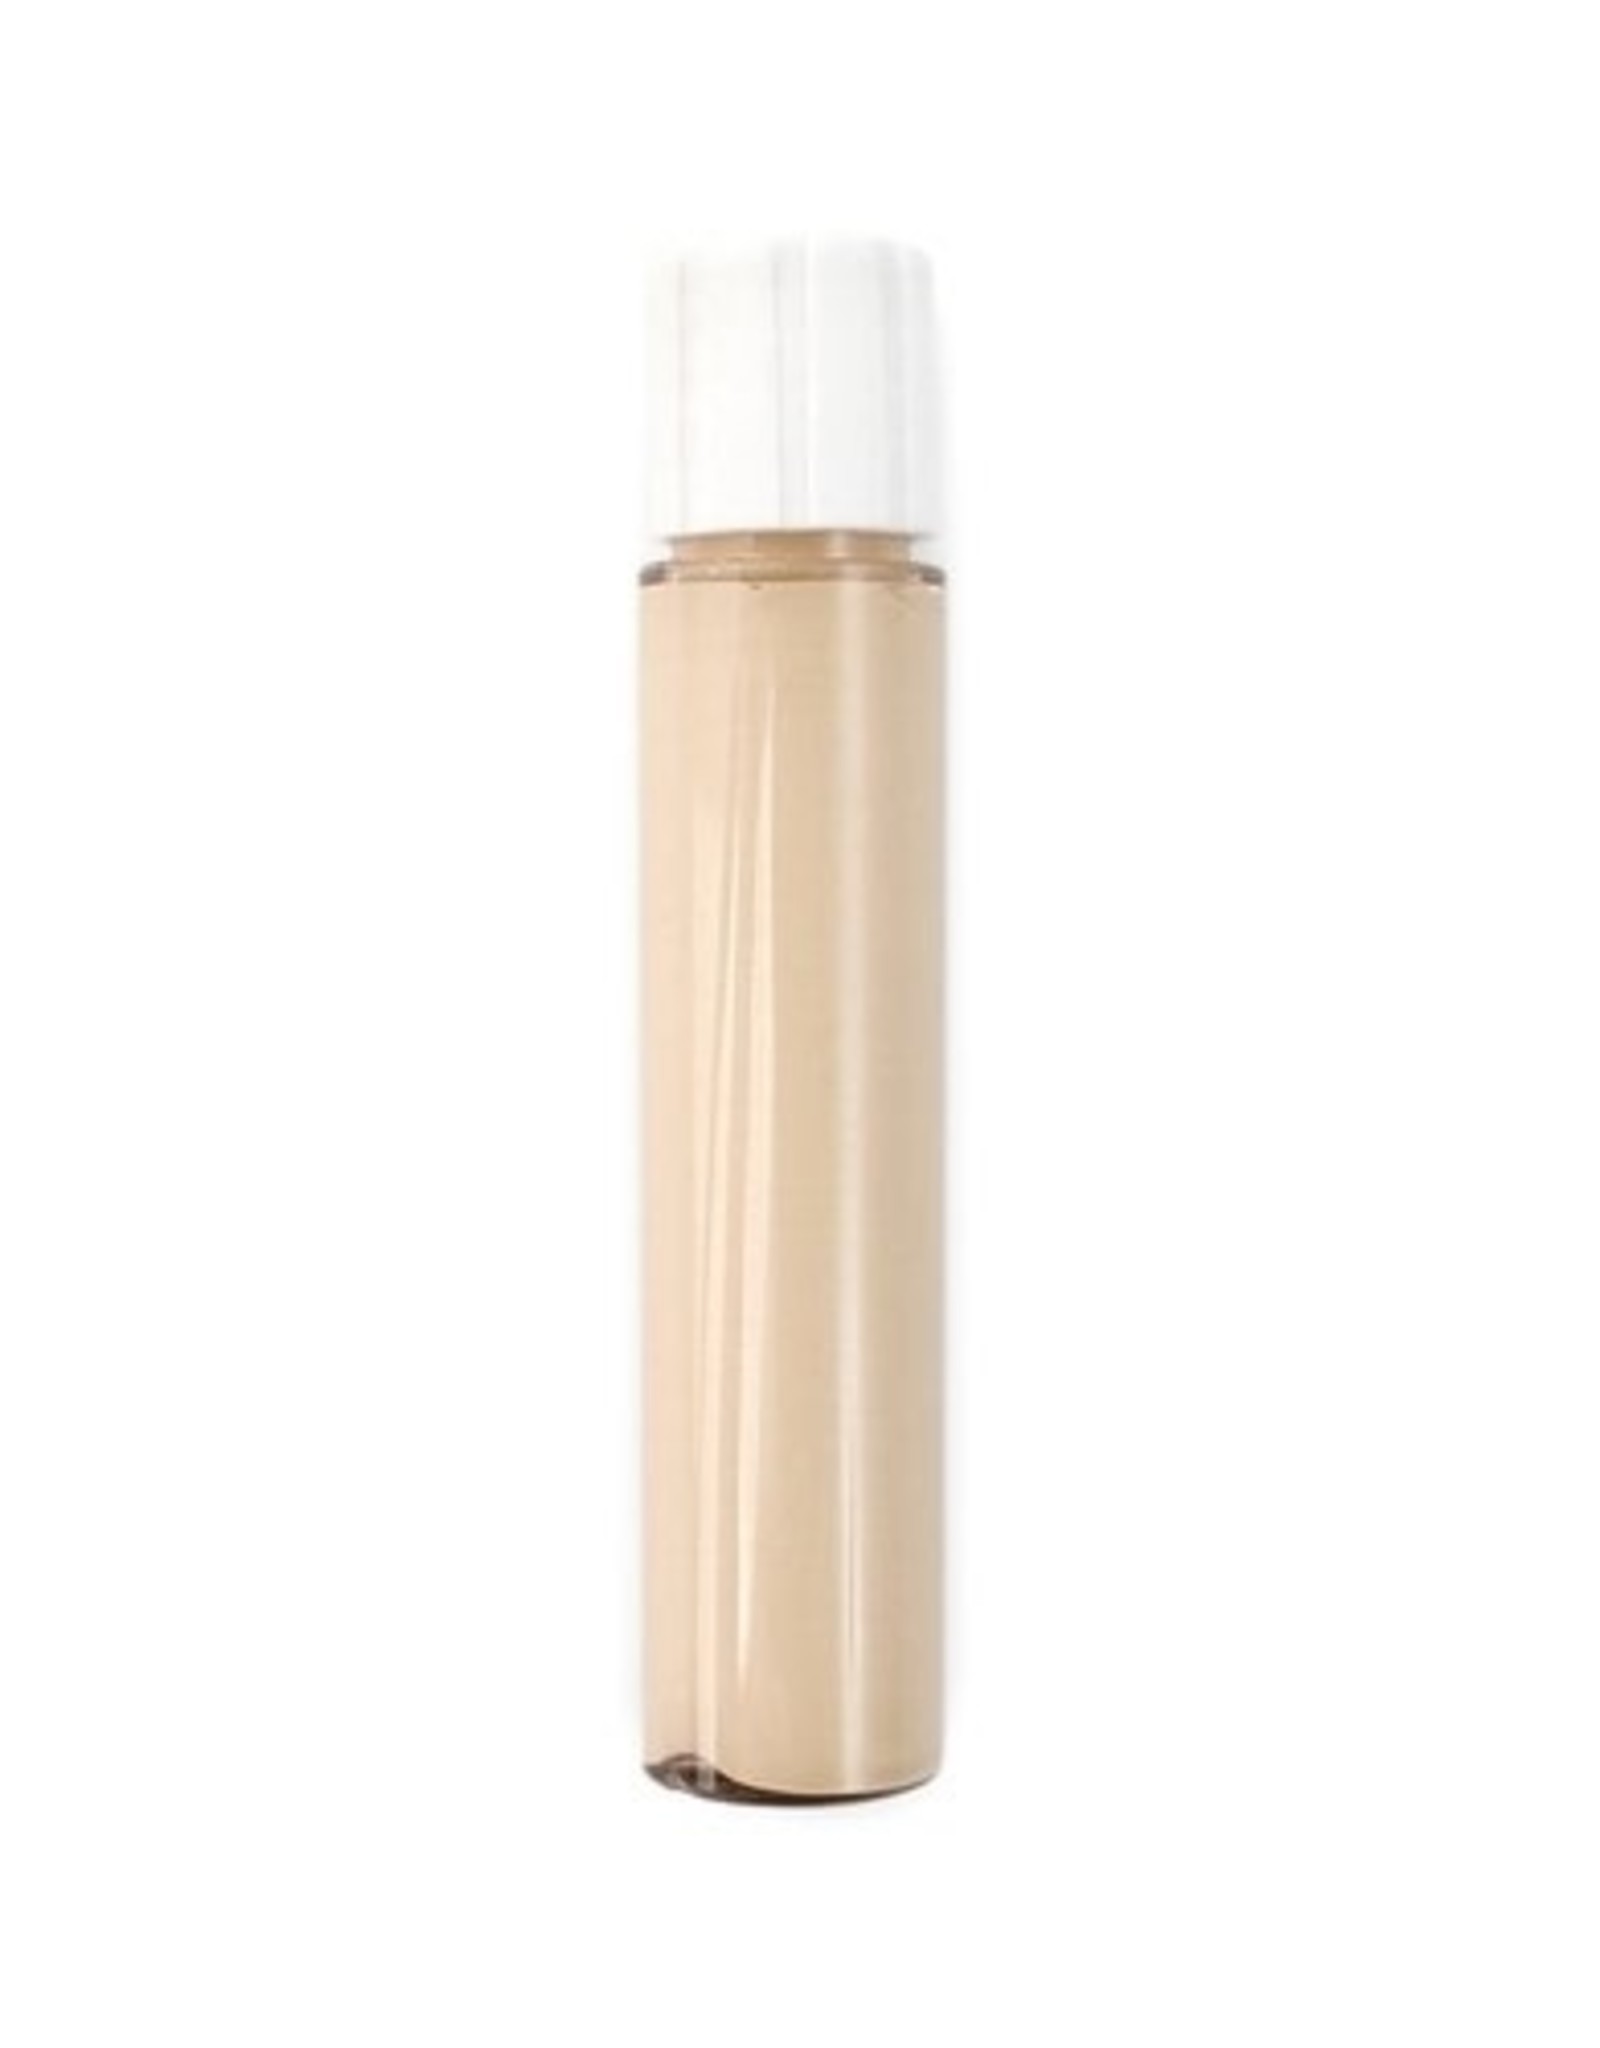 Zao ZAO Bamboe Light Touch Complexion refill 722 (Sand) 4 Gram